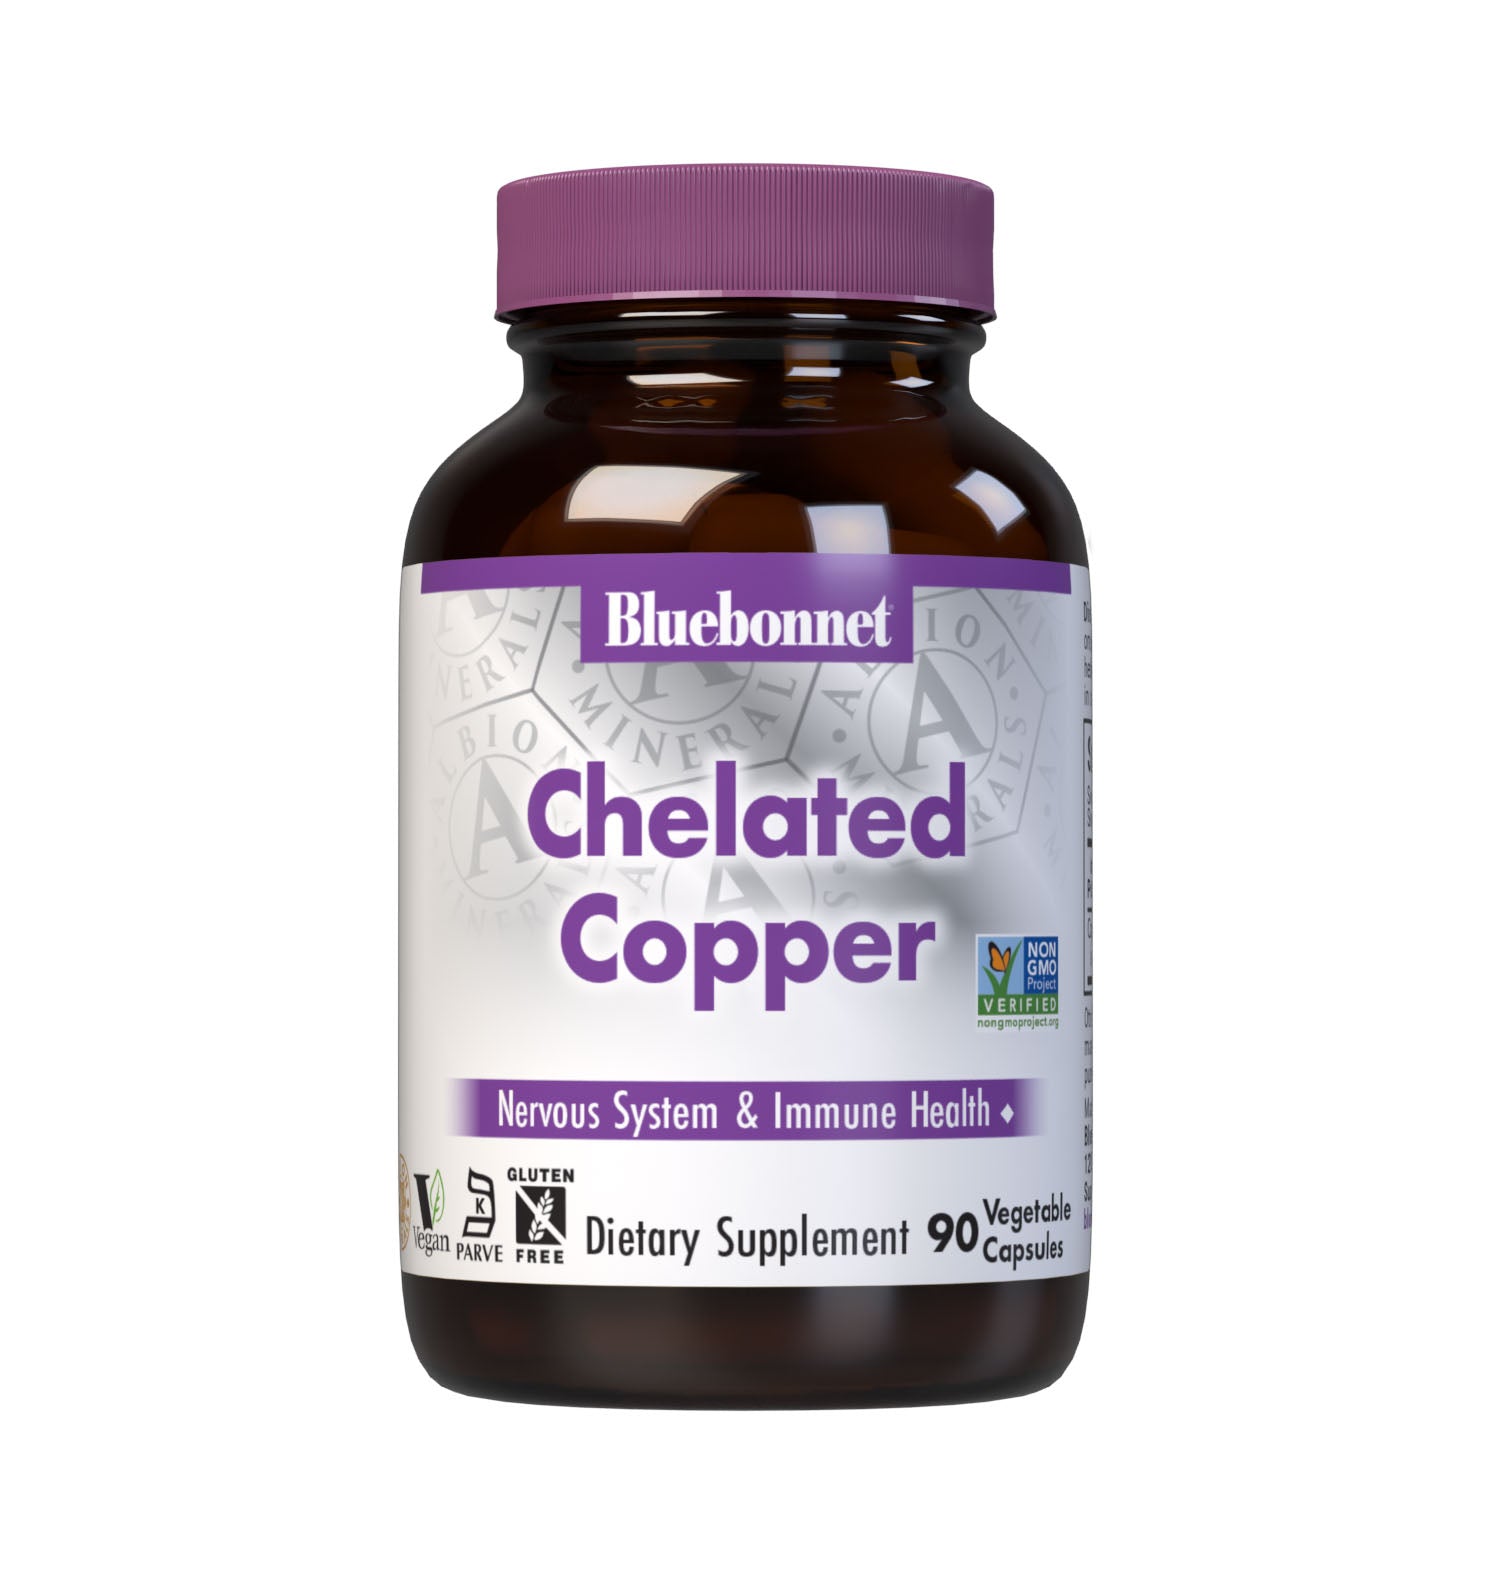 Bluebonnet's Chelated Copper 90 Vegetable Capsules are formulated with 3 mg of elemental copper from fully reacted copper bisglycinate, an amino acid chelate mineral from Albion. Copper is an essential element that is necessary for nervous system and immune health. #size_90 count